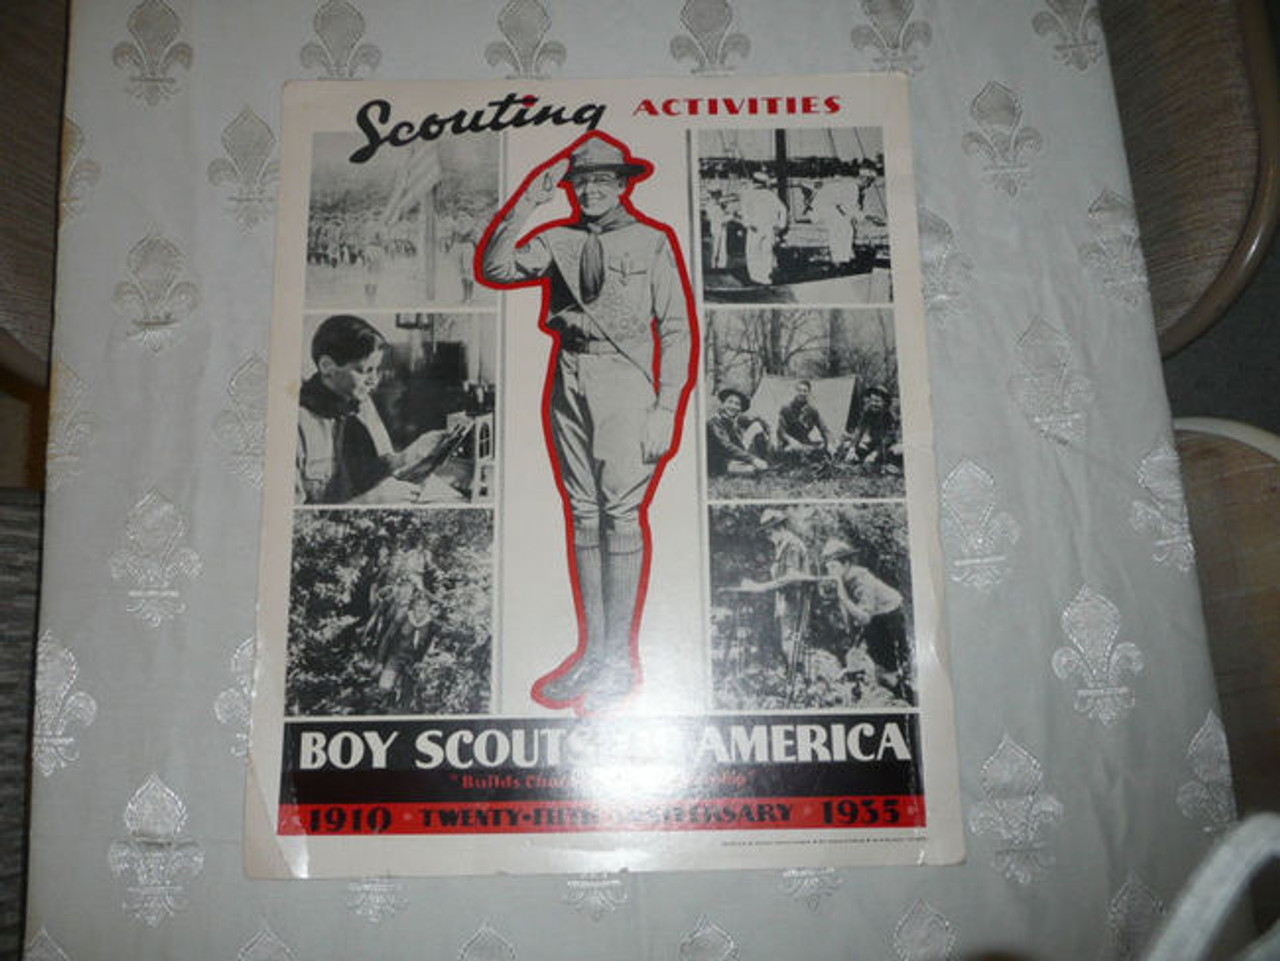 Boy Scouts of America 25th Anniversary Poster, reissued by Johnston Museum